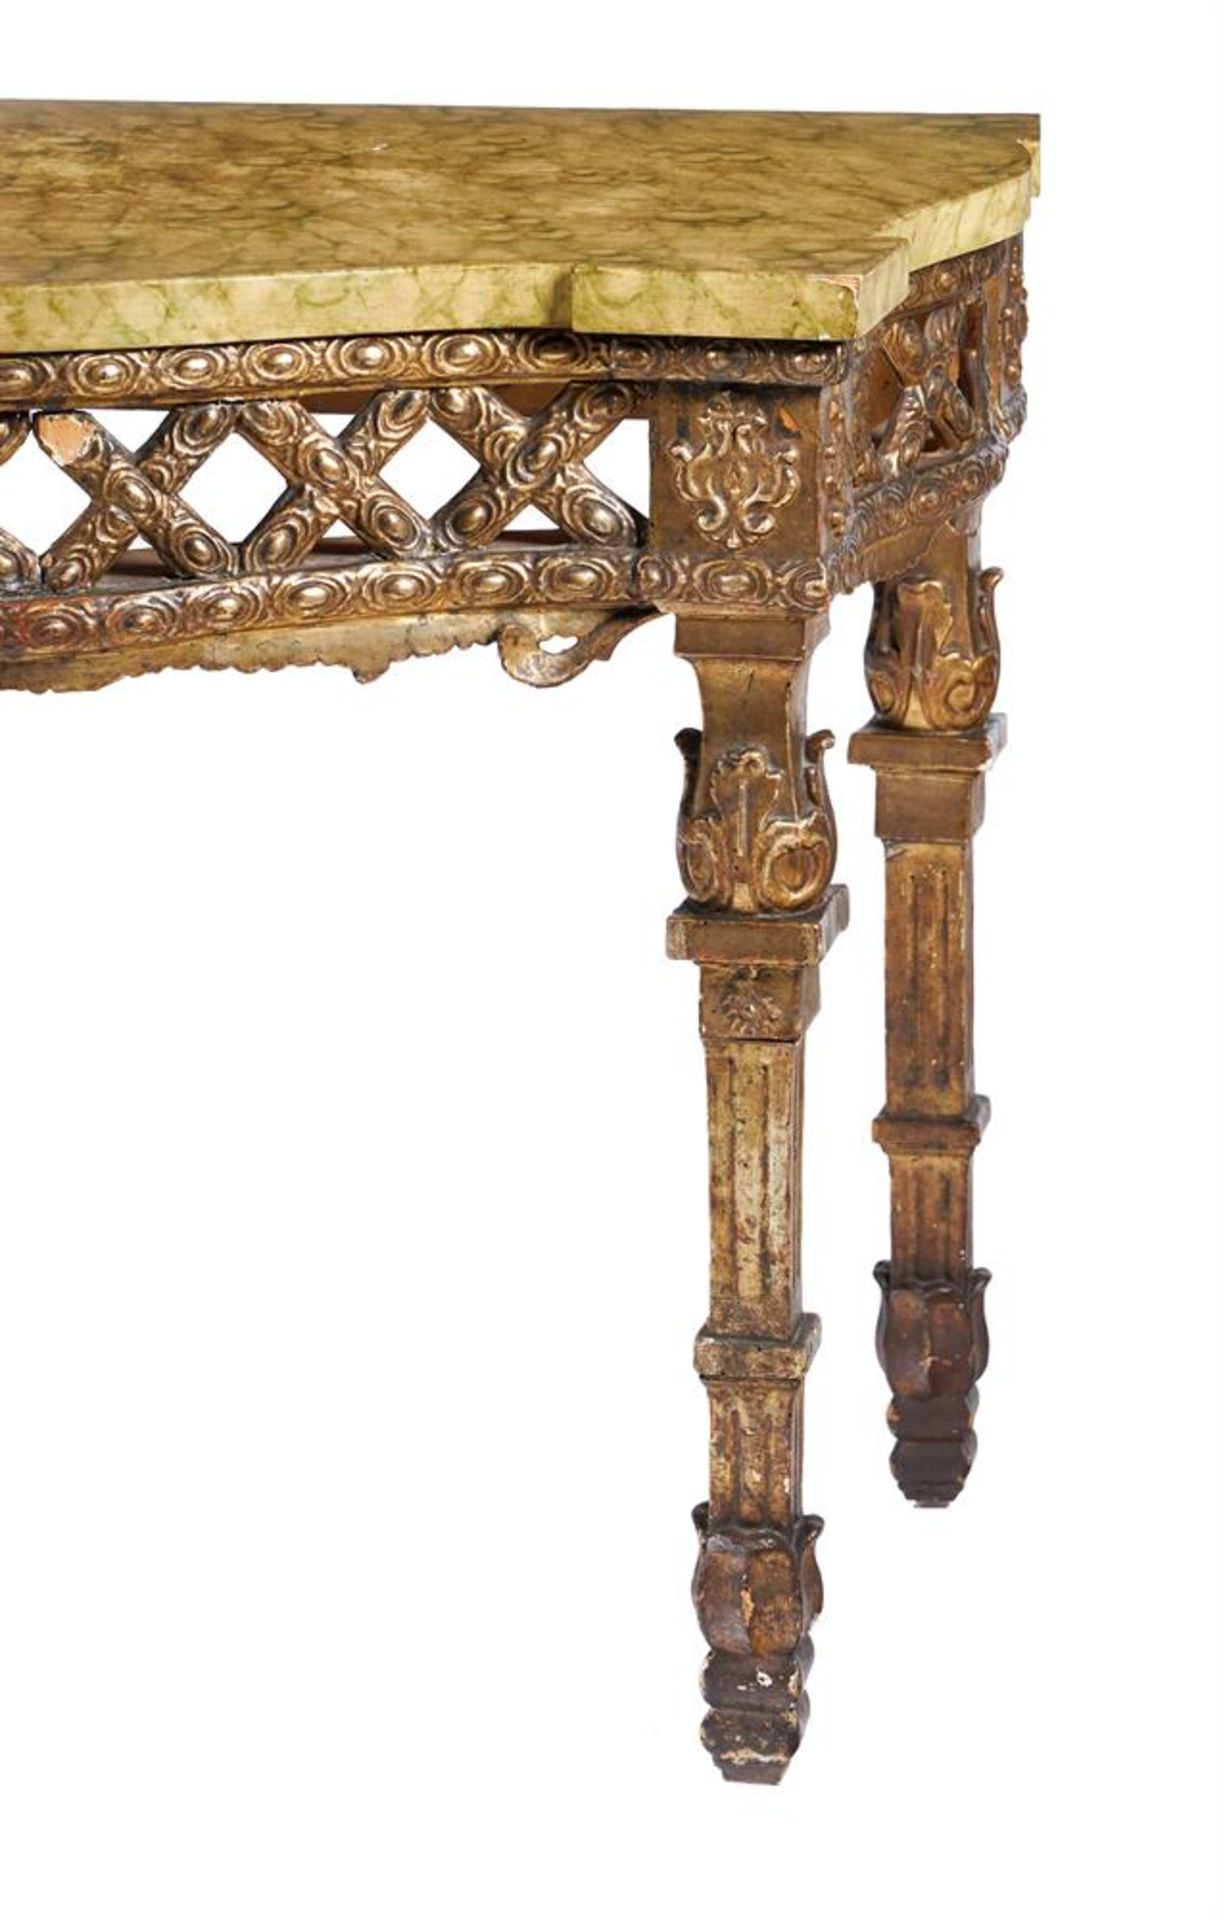 A GILTWOOD CONSOLE TABLE IN LOUIS XVI STYLE, 19TH CENTURY - Image 3 of 4